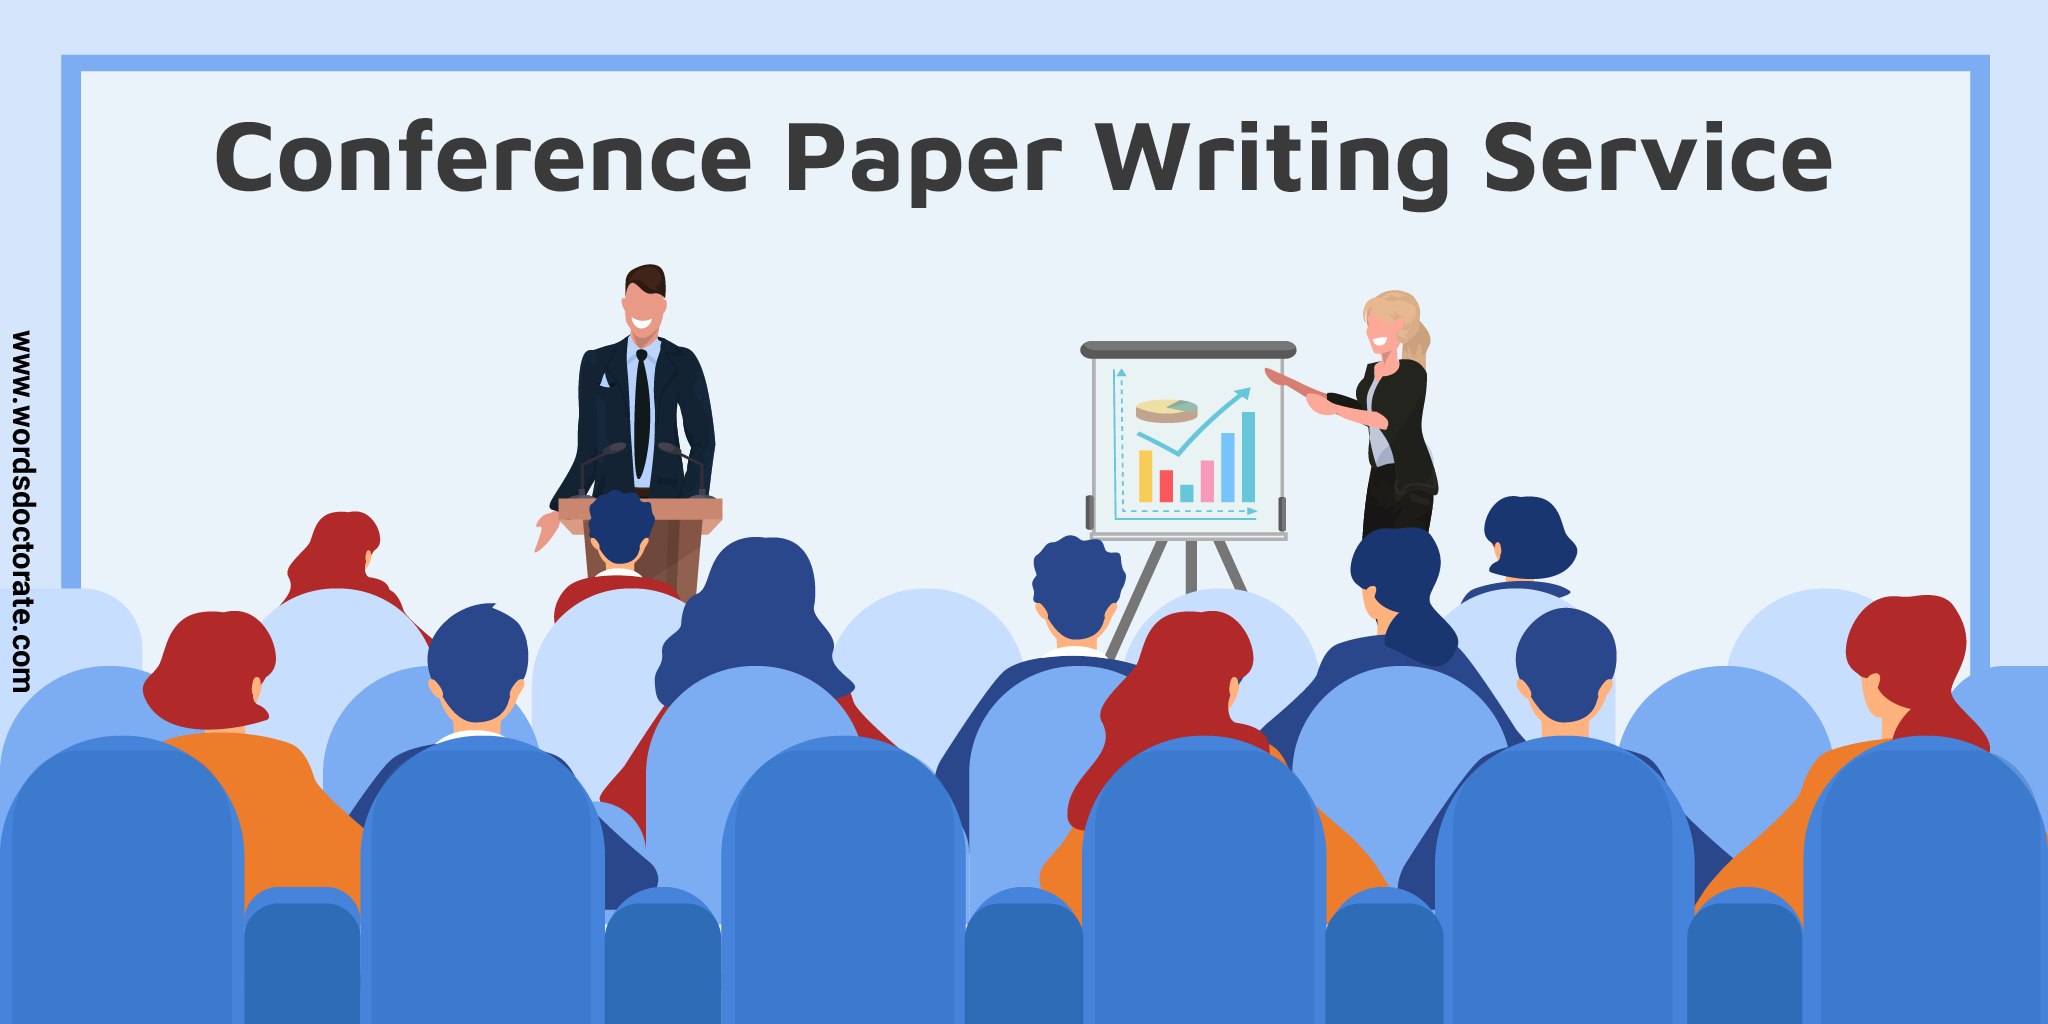 Conference paper